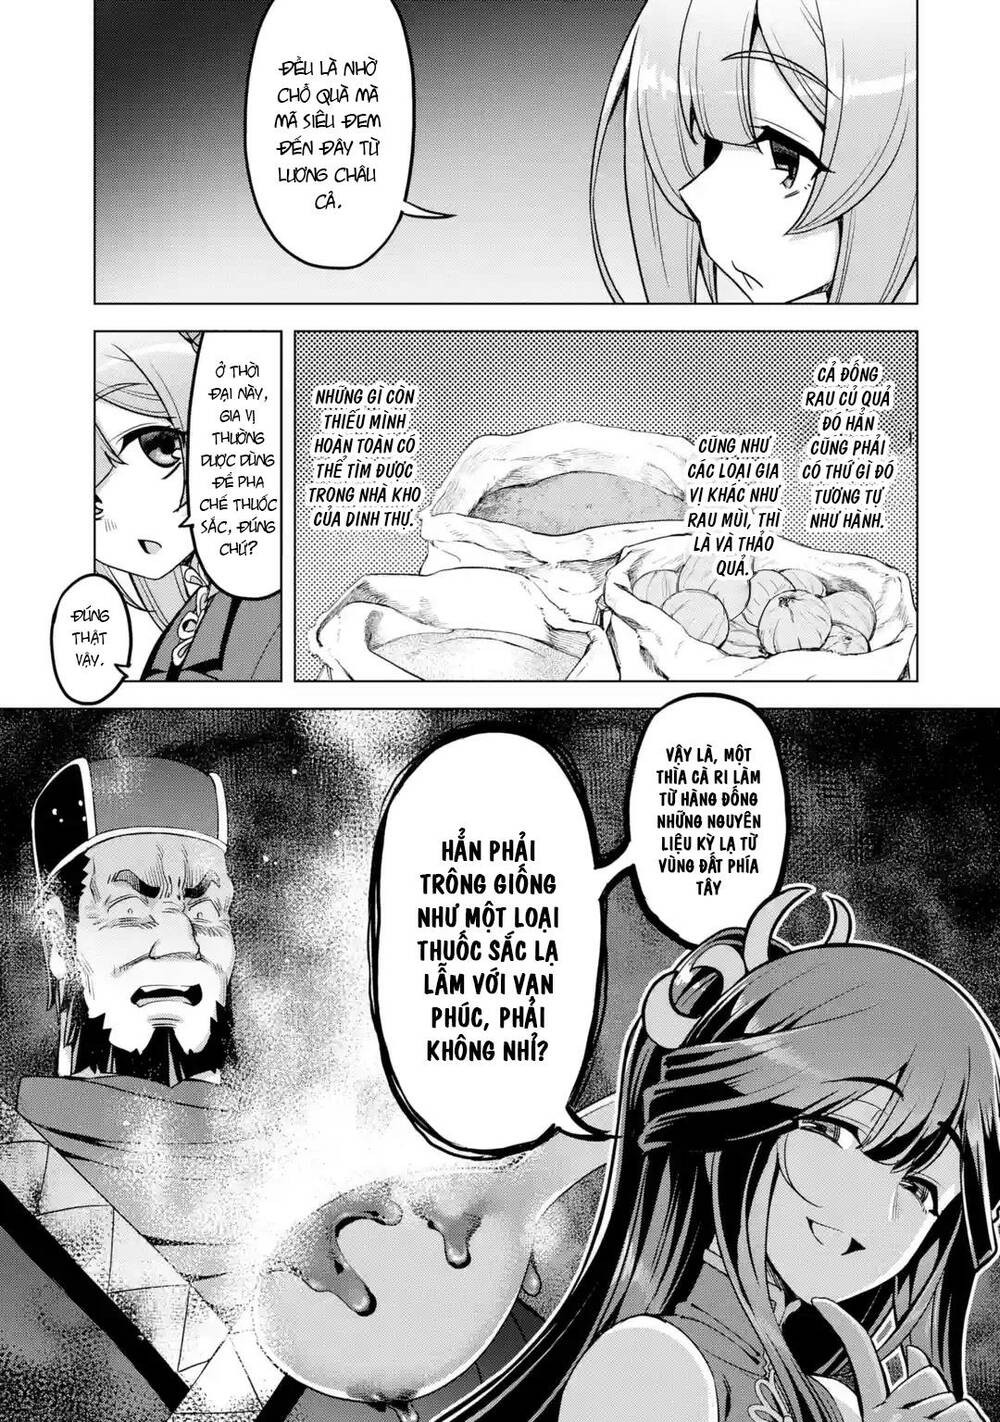 Awakening in the Three Kingdoms as the Demon's Daughter ~The Legend of Dong Bai~: Chapter 9